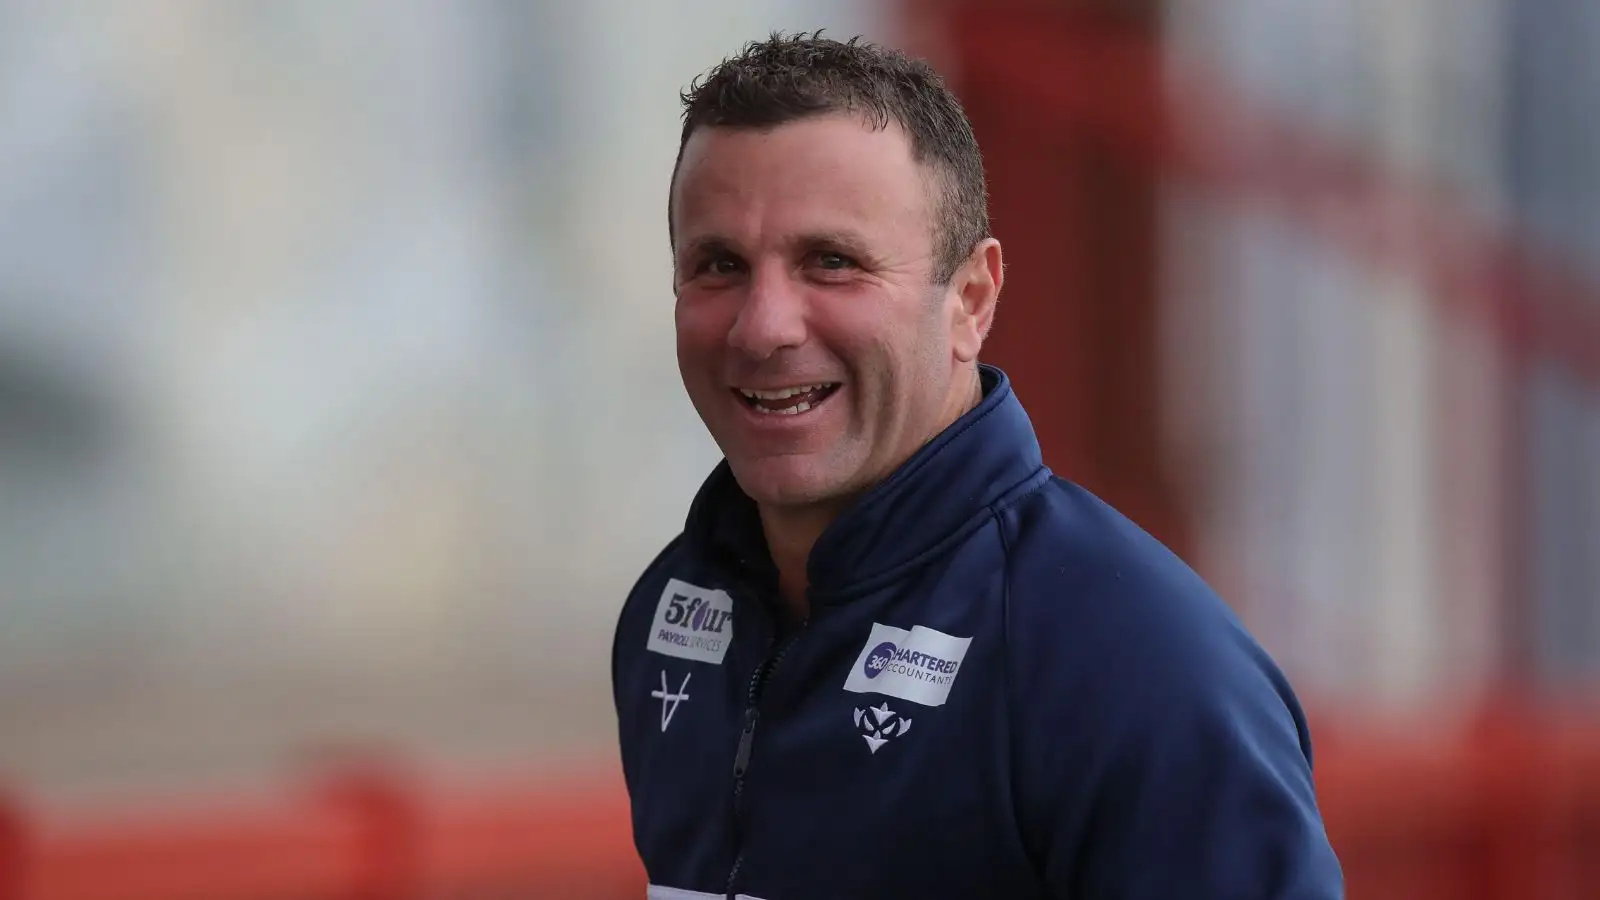 Hull KR: Play-off home tie the aim for boss Willie Peters after win over Catalans Dragons